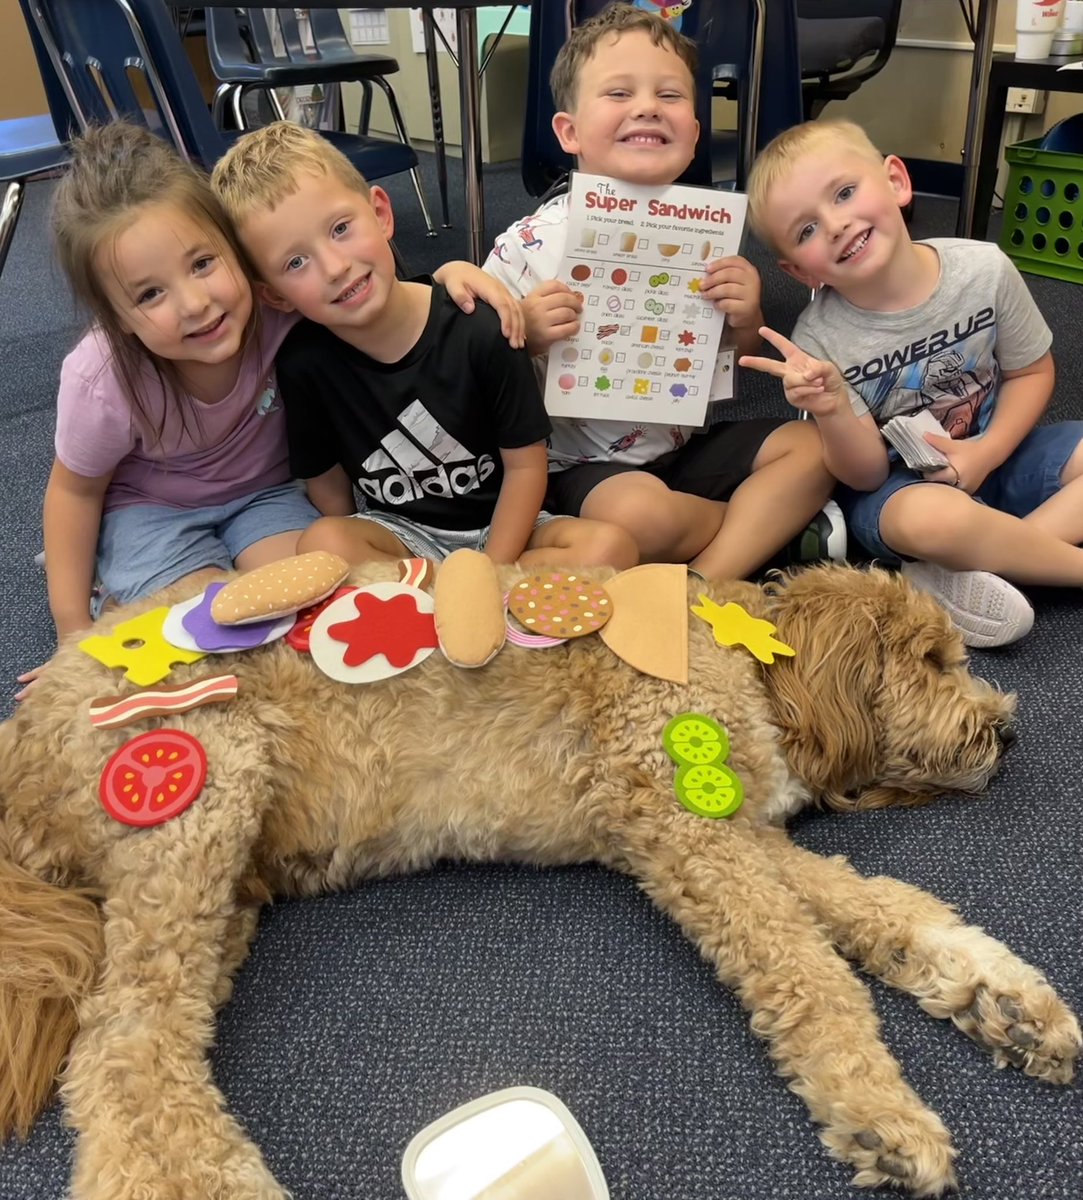 Blaze doing his thing to help kids learn💙💛🐾 @SCESSpeechSquad @scesbobcats #cutenessoverload #AnimalAssistedTherapy